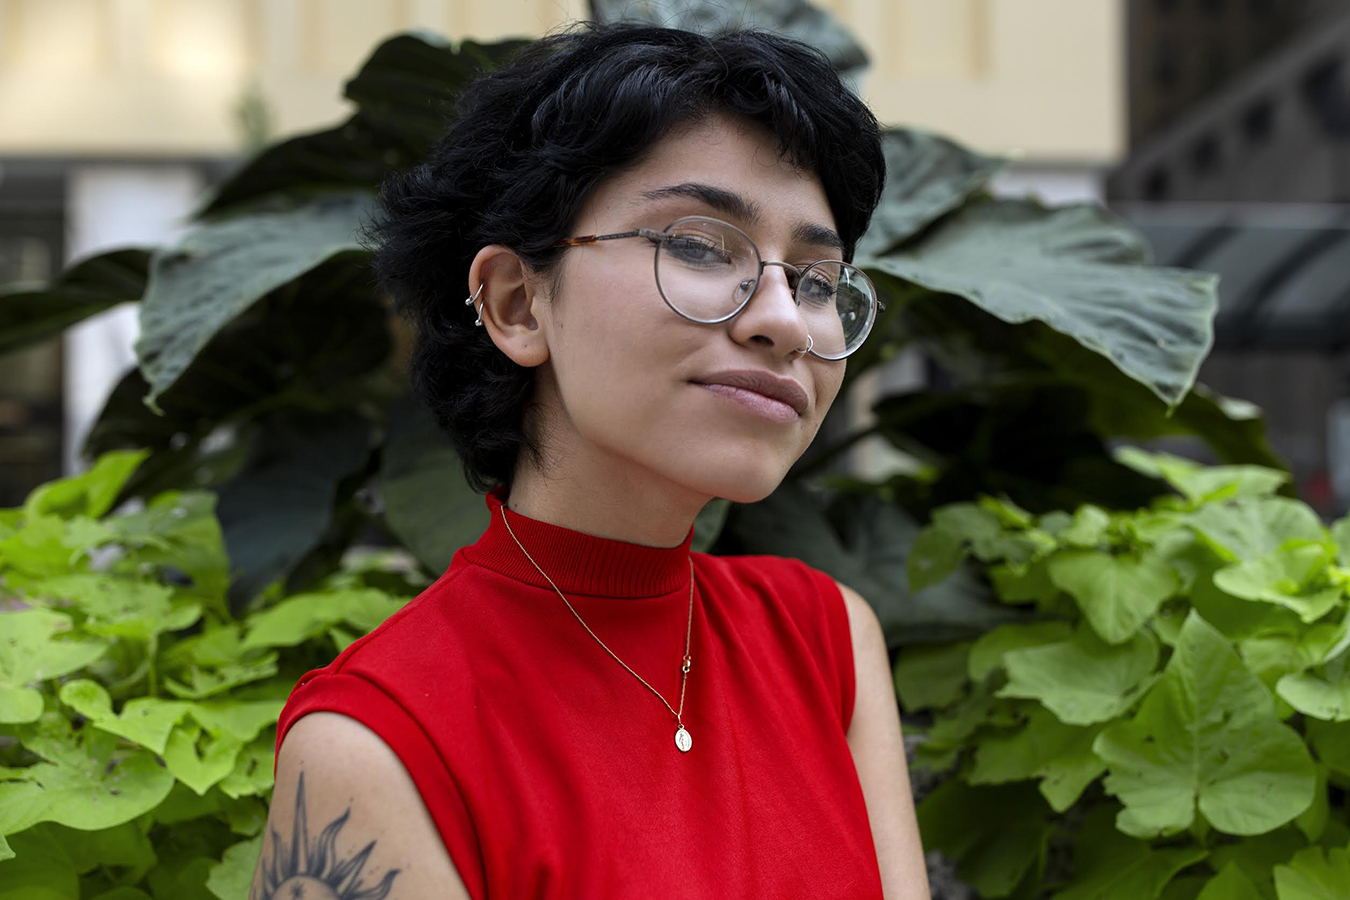 Eden Jolie, a summer 2021 intern, is a New Mexico native and a writing student at the School of the Art Institute of Chicago. Her passion for the arts and dedication to social progress is what drives her curiosity and focus.